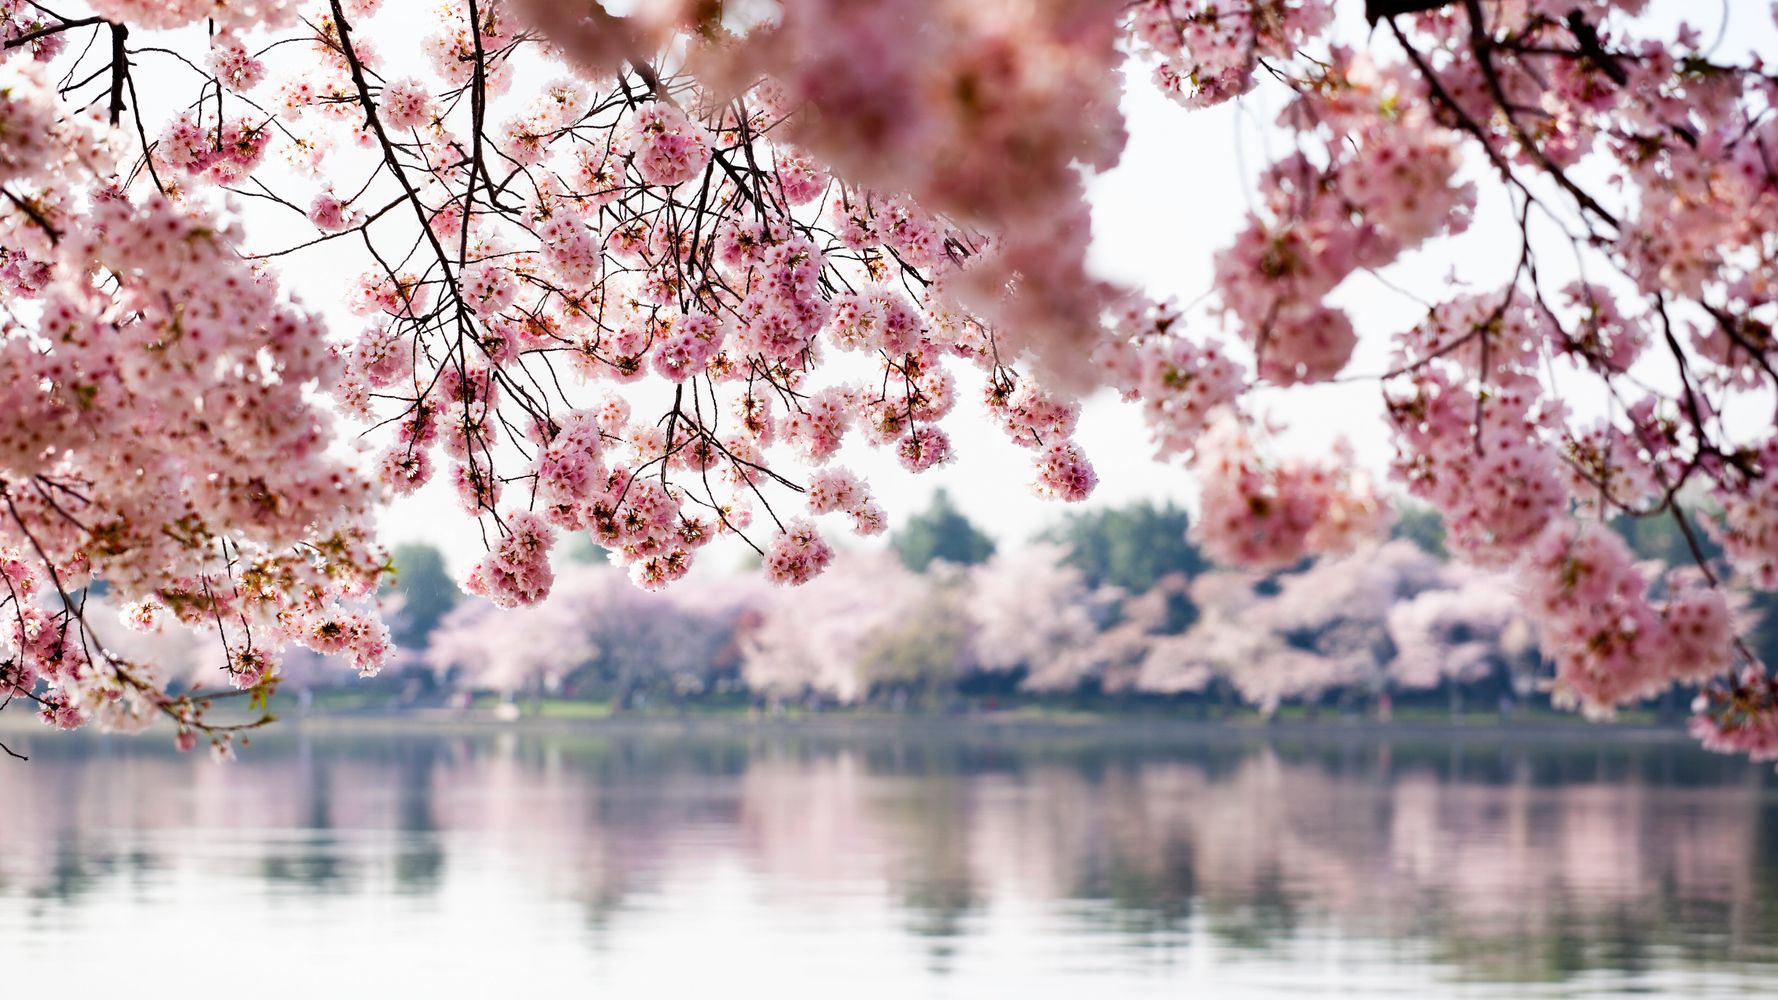 Here's Where You Can See Cherry Blossoms In The U.S.